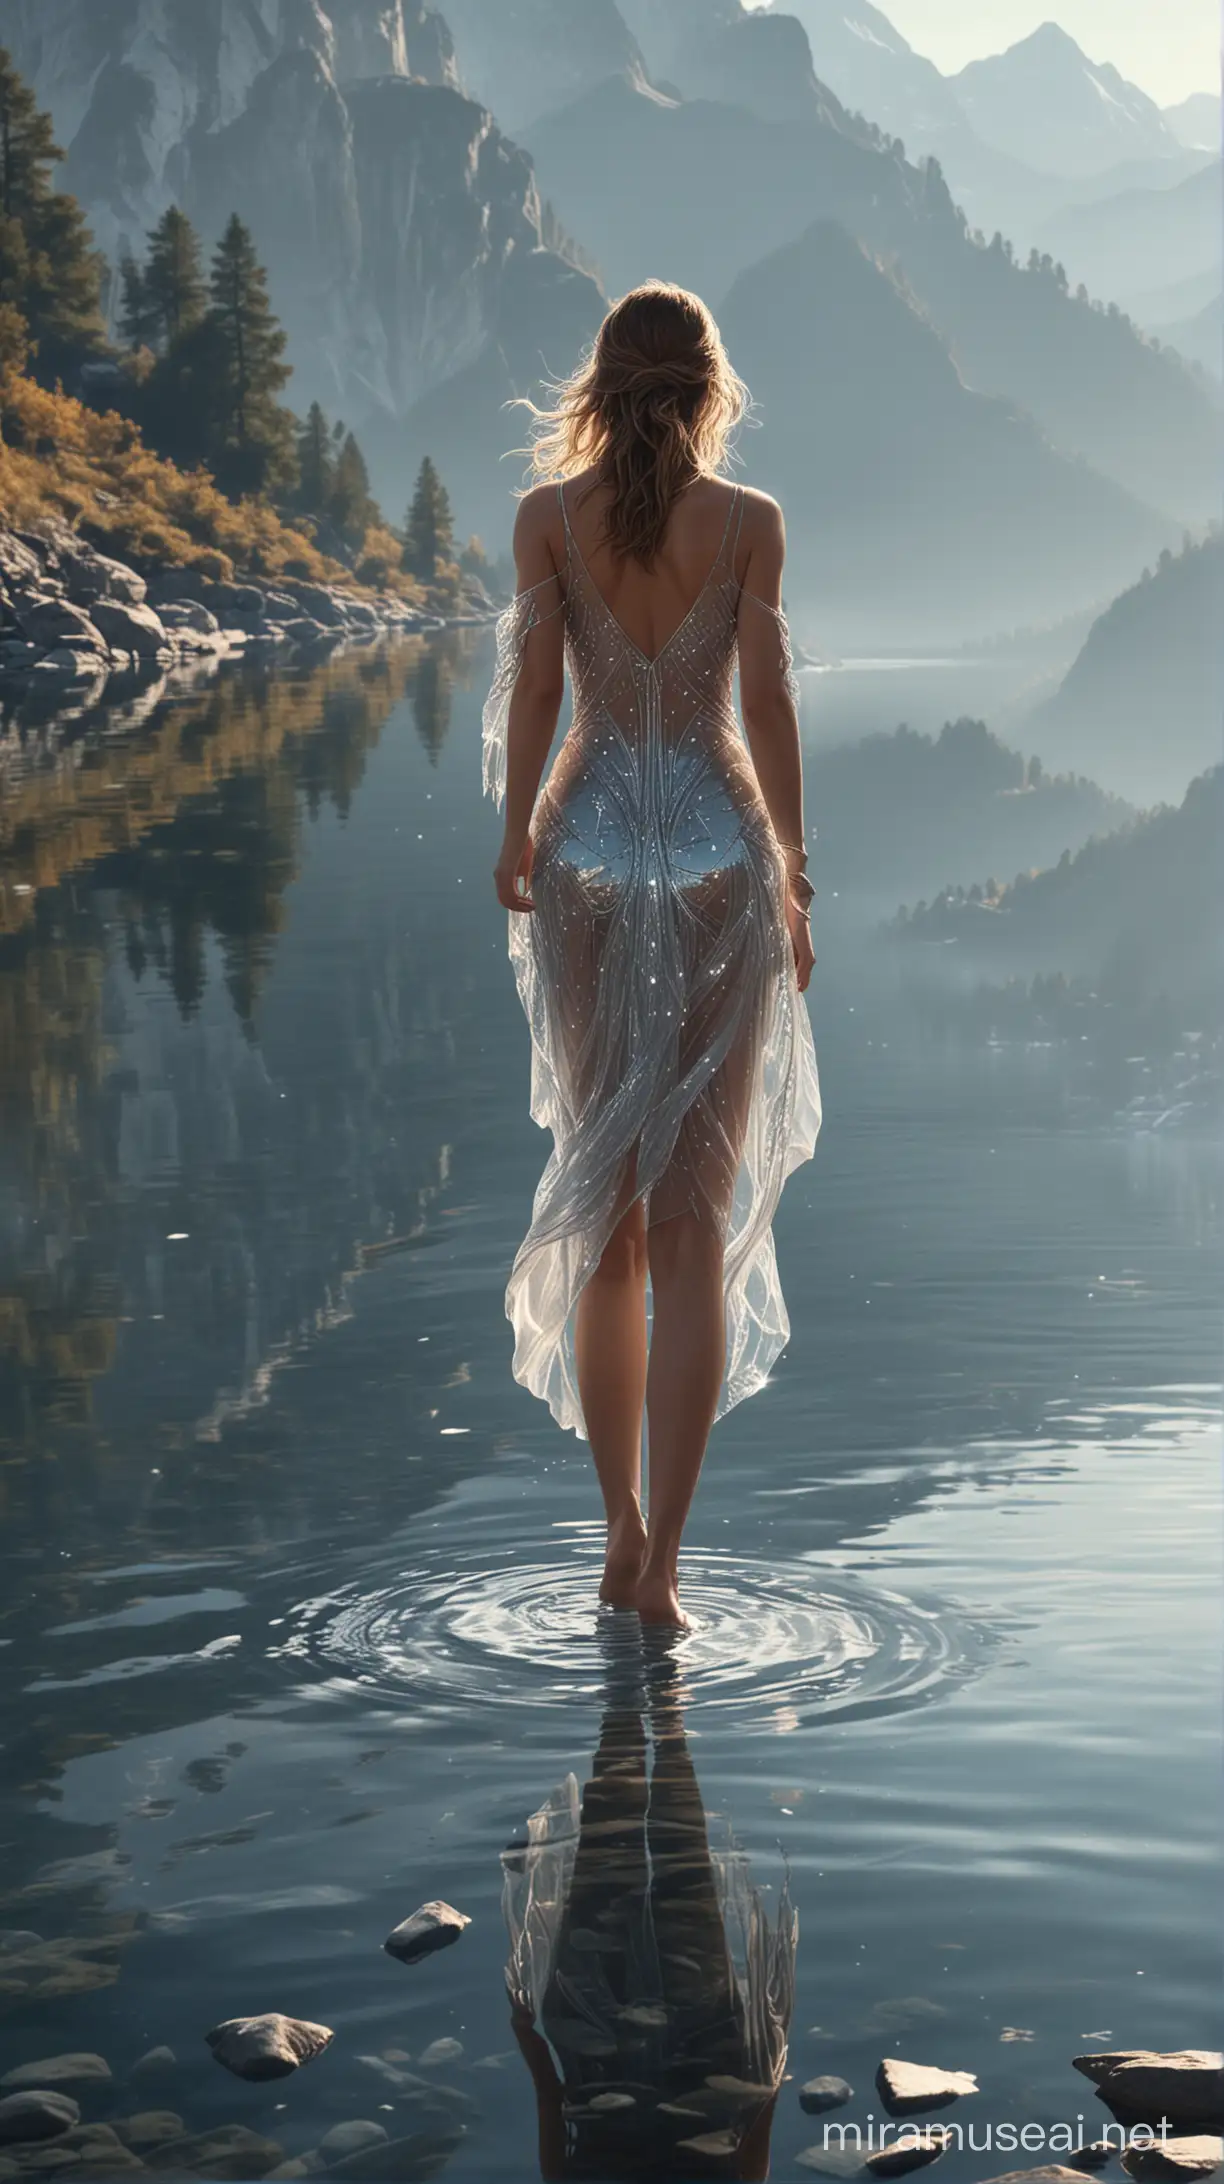 Majestic Woman Walking on Crystal Lake Surrounded by Mountains